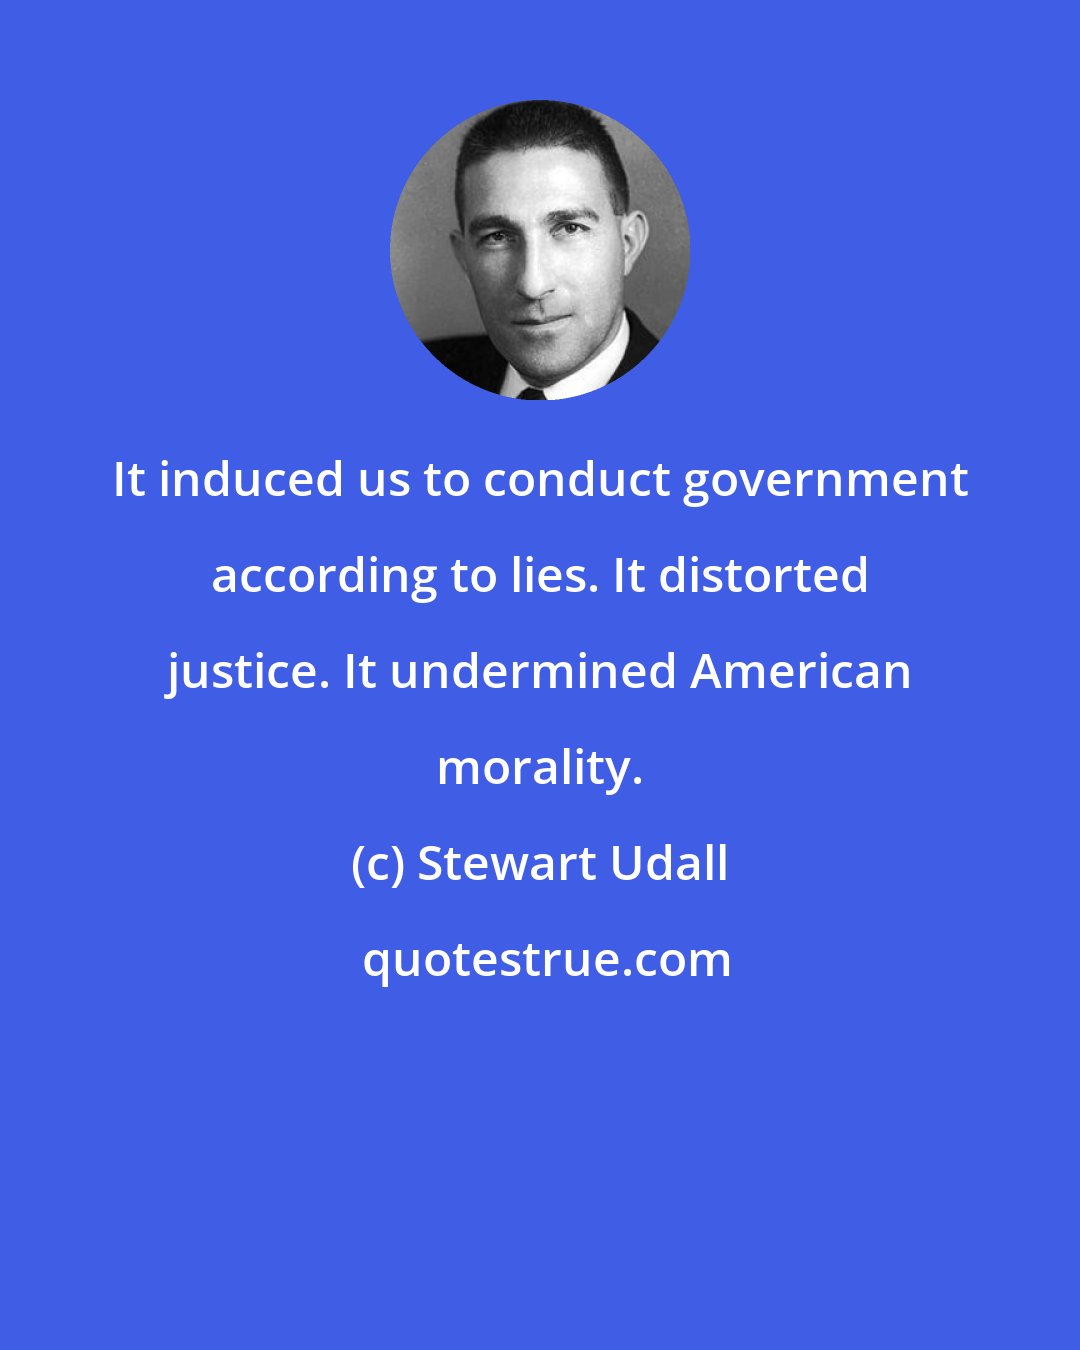 Stewart Udall: It induced us to conduct government according to lies. It distorted justice. It undermined American morality.